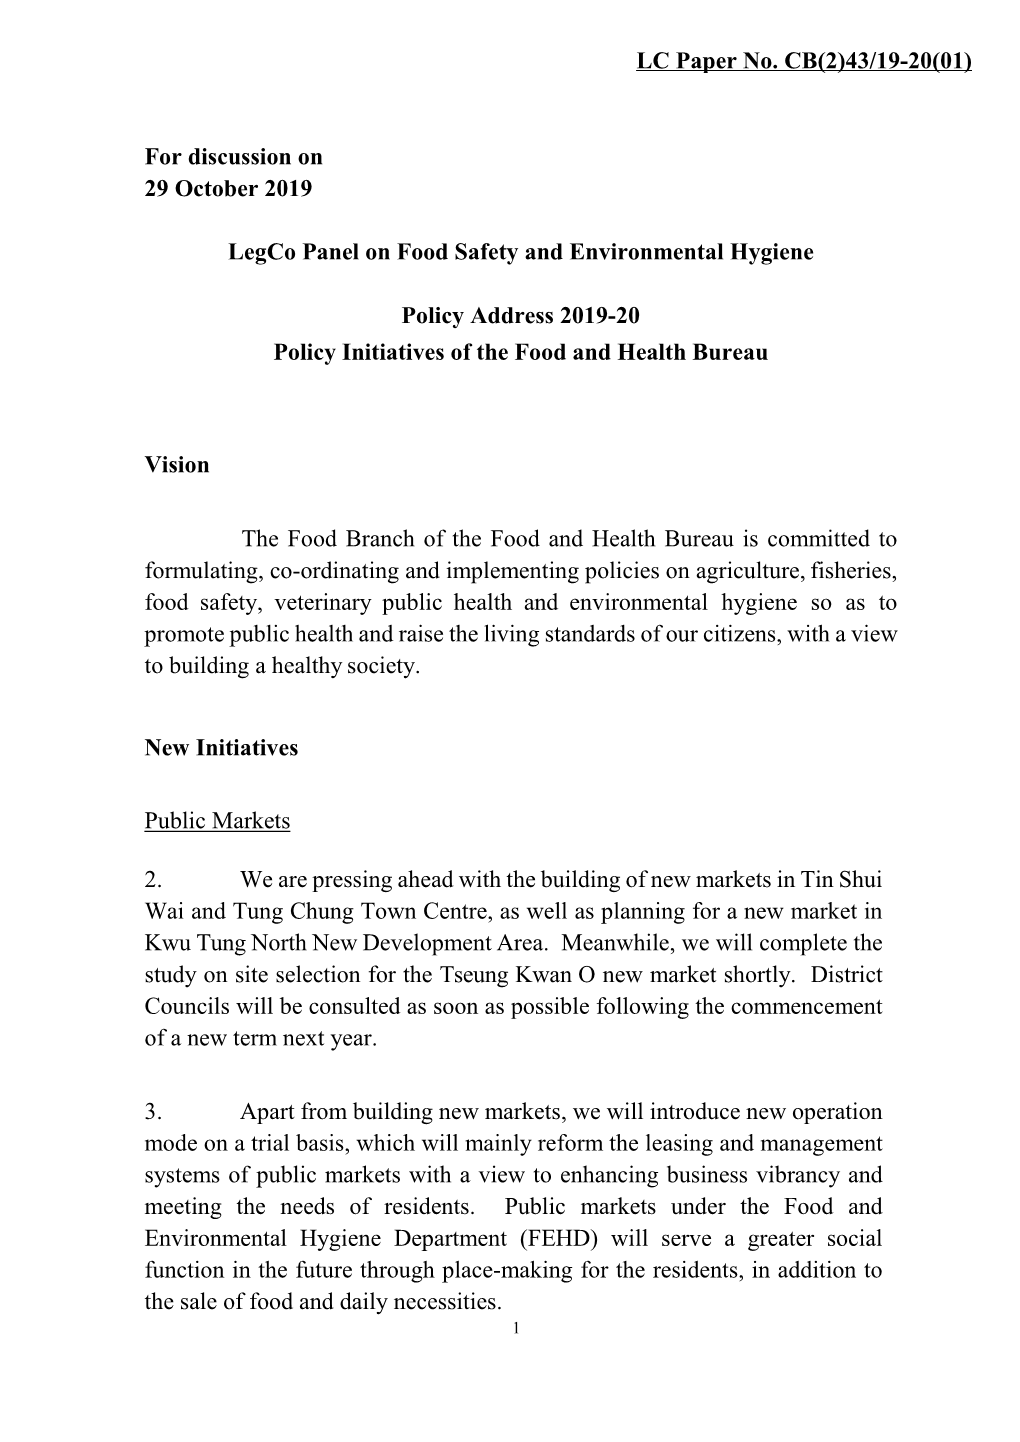 For Discussion on 29 October 2019 Legco Panel on Food Safety And